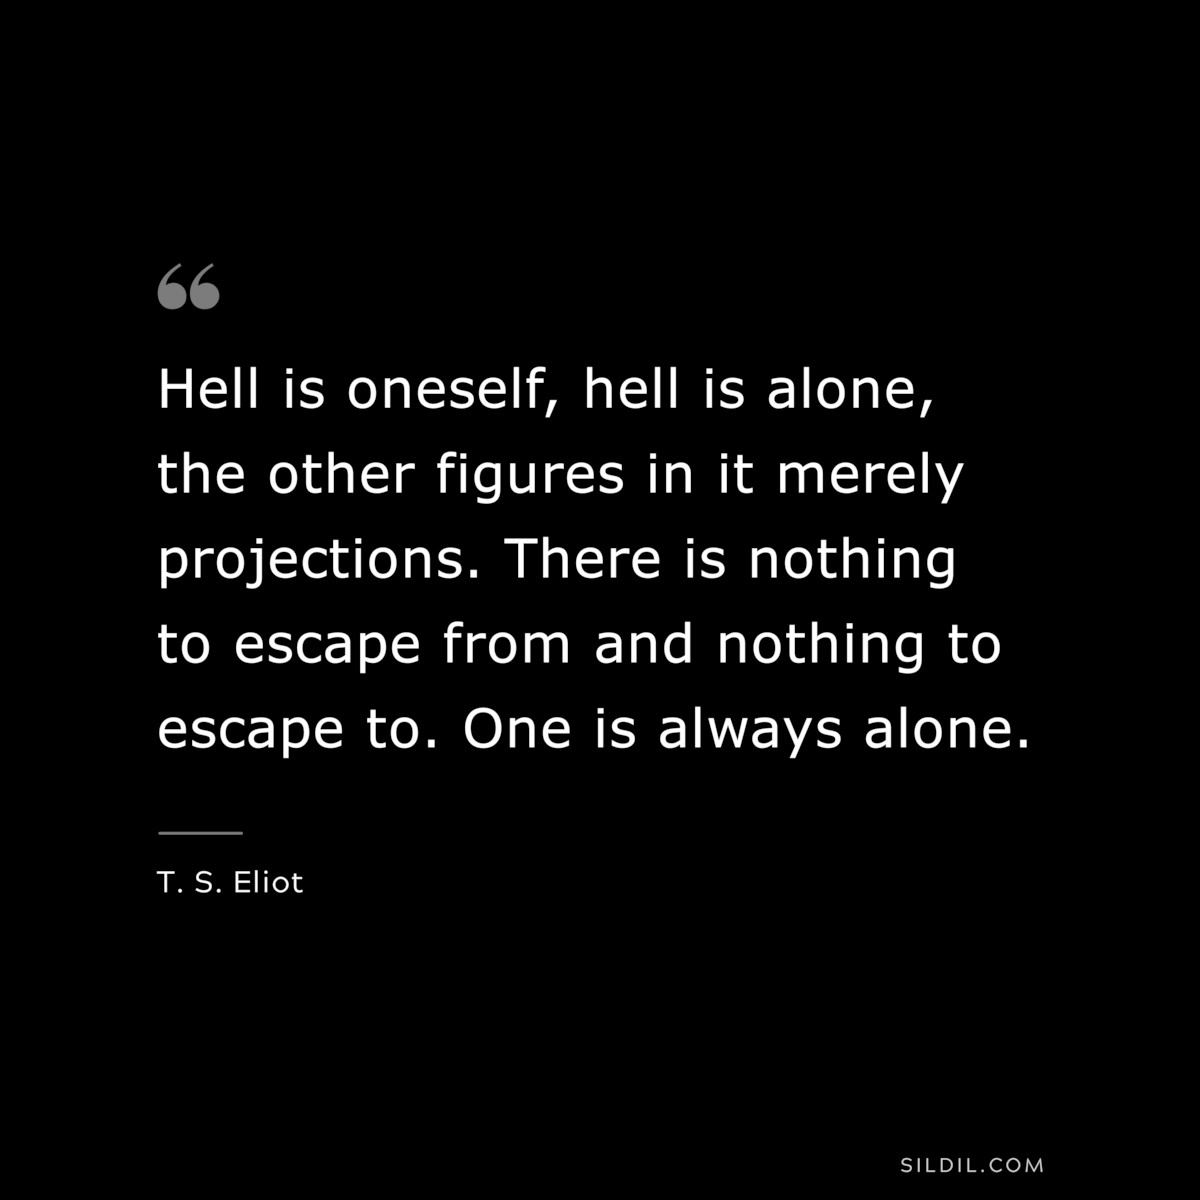 Hell is oneself, hell is alone, the other figures in it merely projections. There is nothing to escape from and nothing to escape to. One is always alone. ― T. S. Eliot